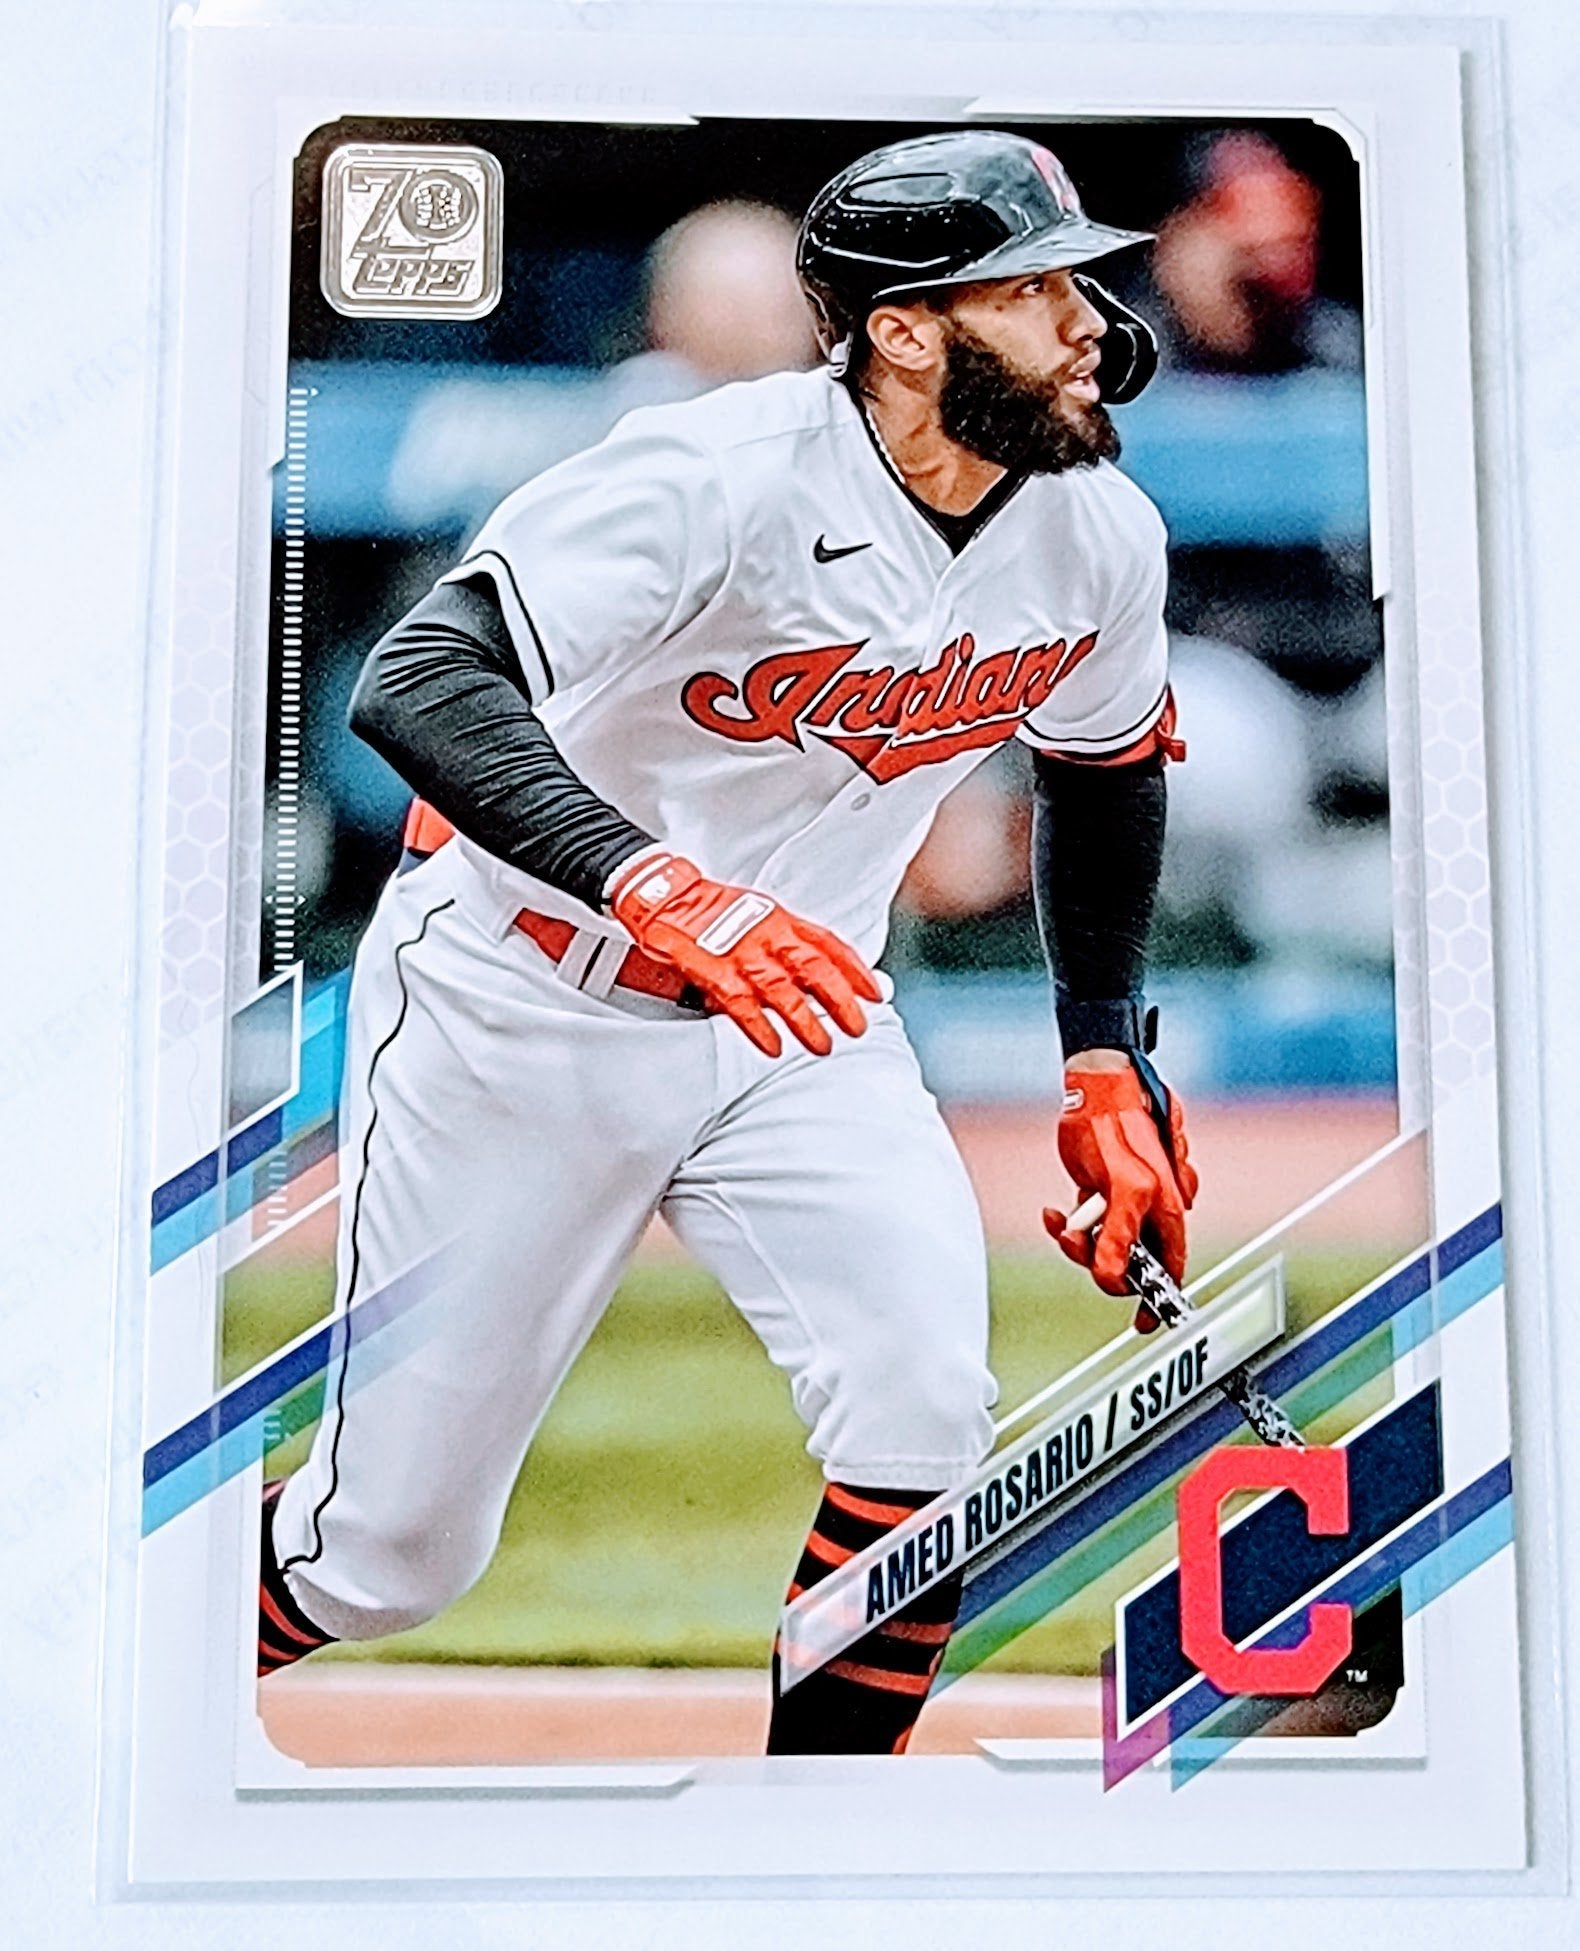 2021 Topps Update Amed Rosario Baseball Trading Card SMCB1 simple Xclusive Collectibles   